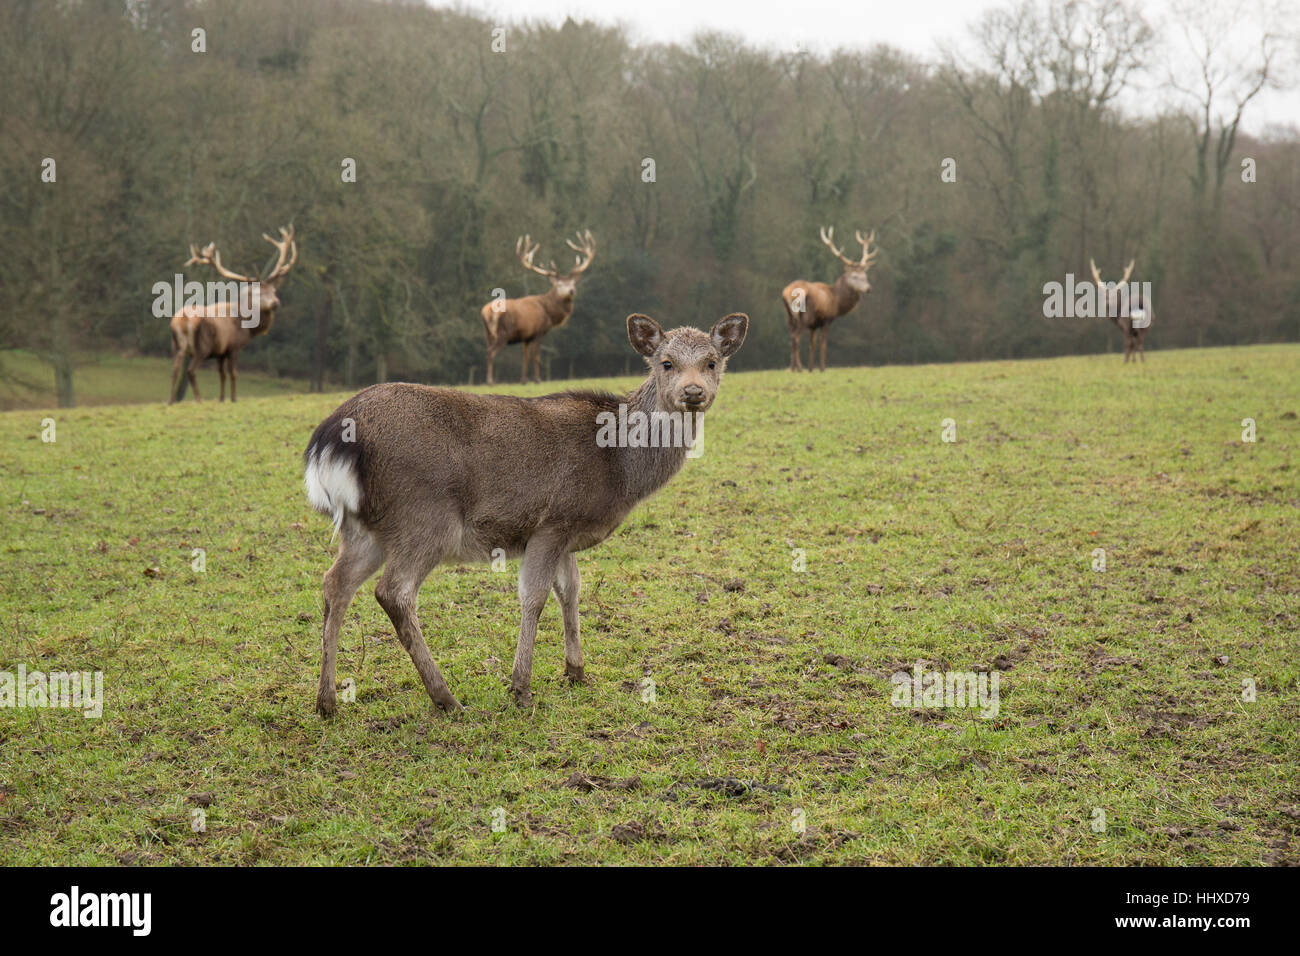 small deer in the foreground with 4 red deer stags standing in the background in a field Stock Photo